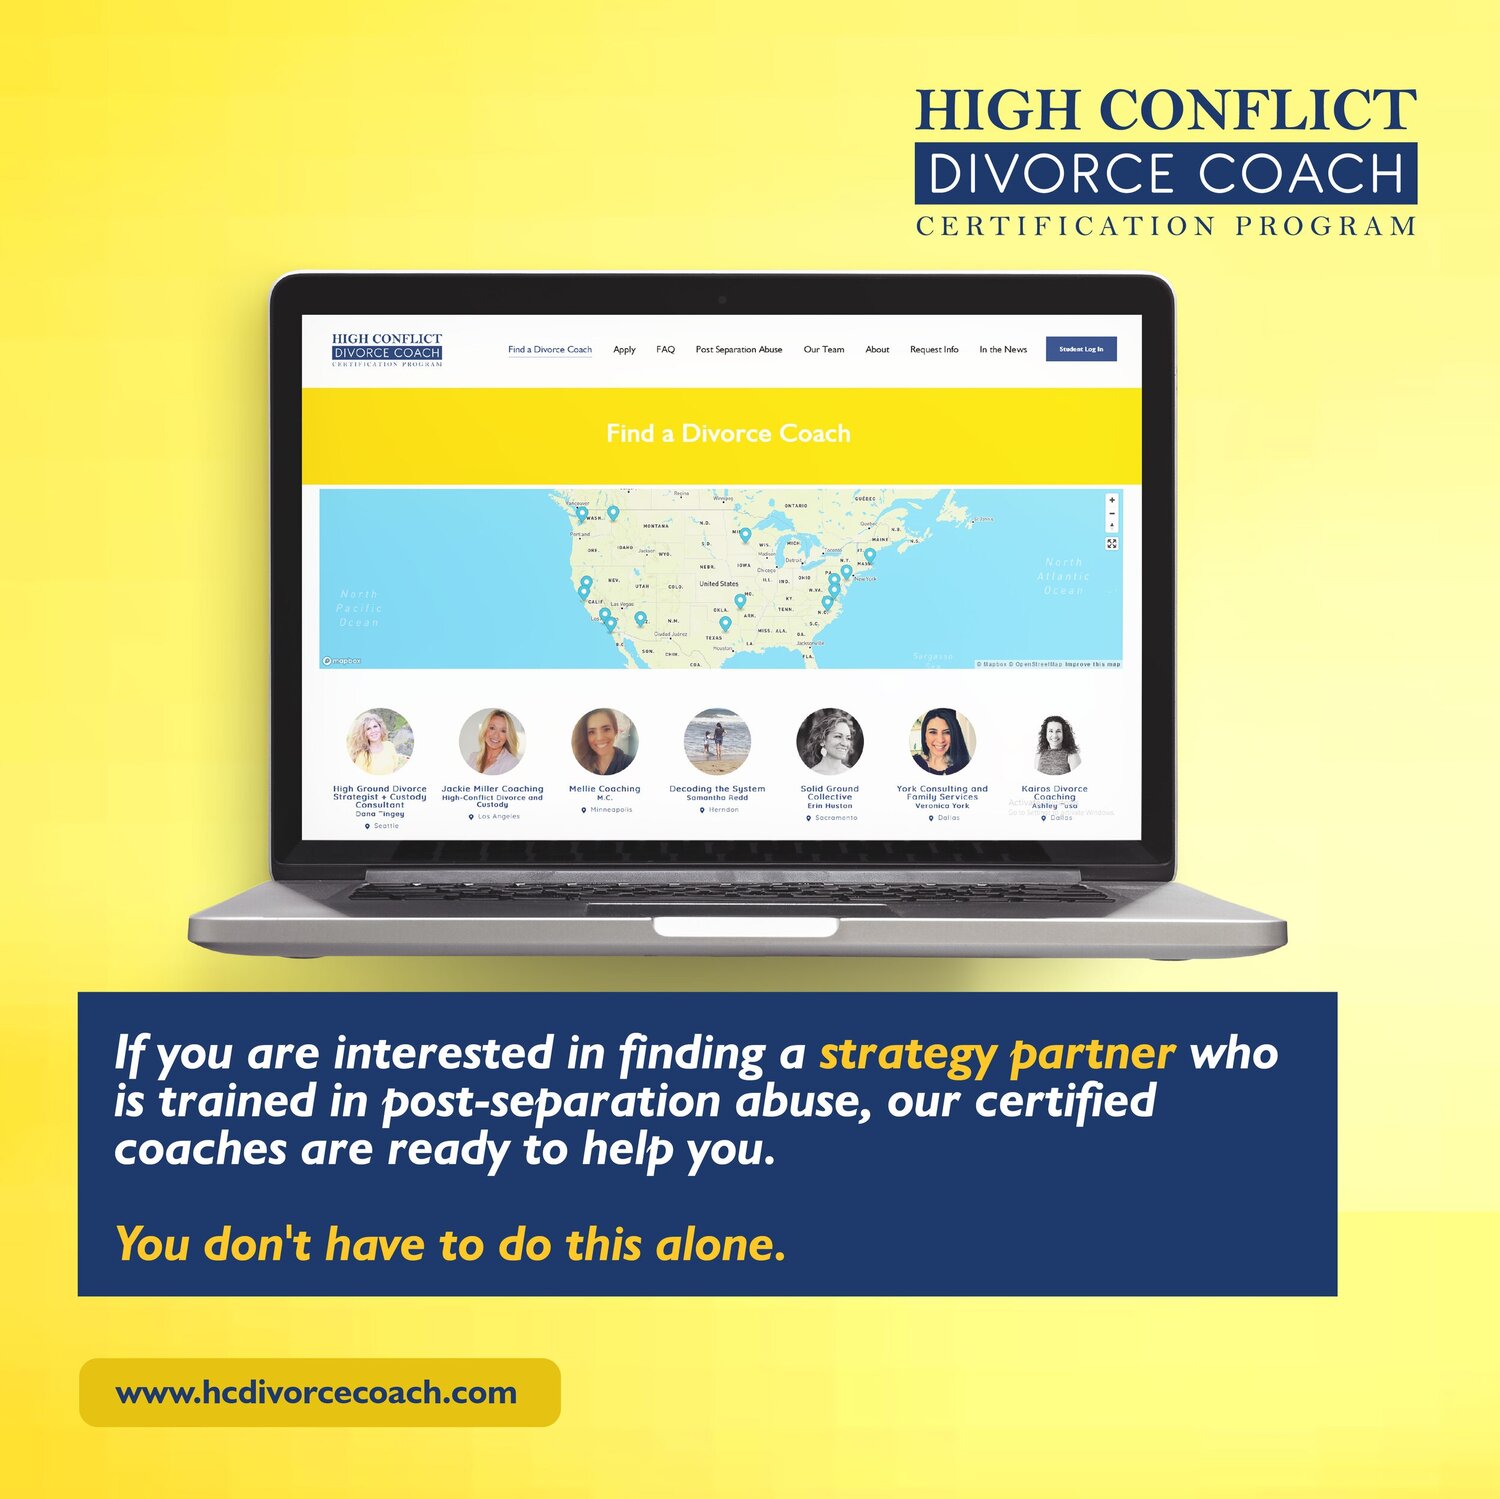 Find a Certified High Conflict Divorce Coach Near You